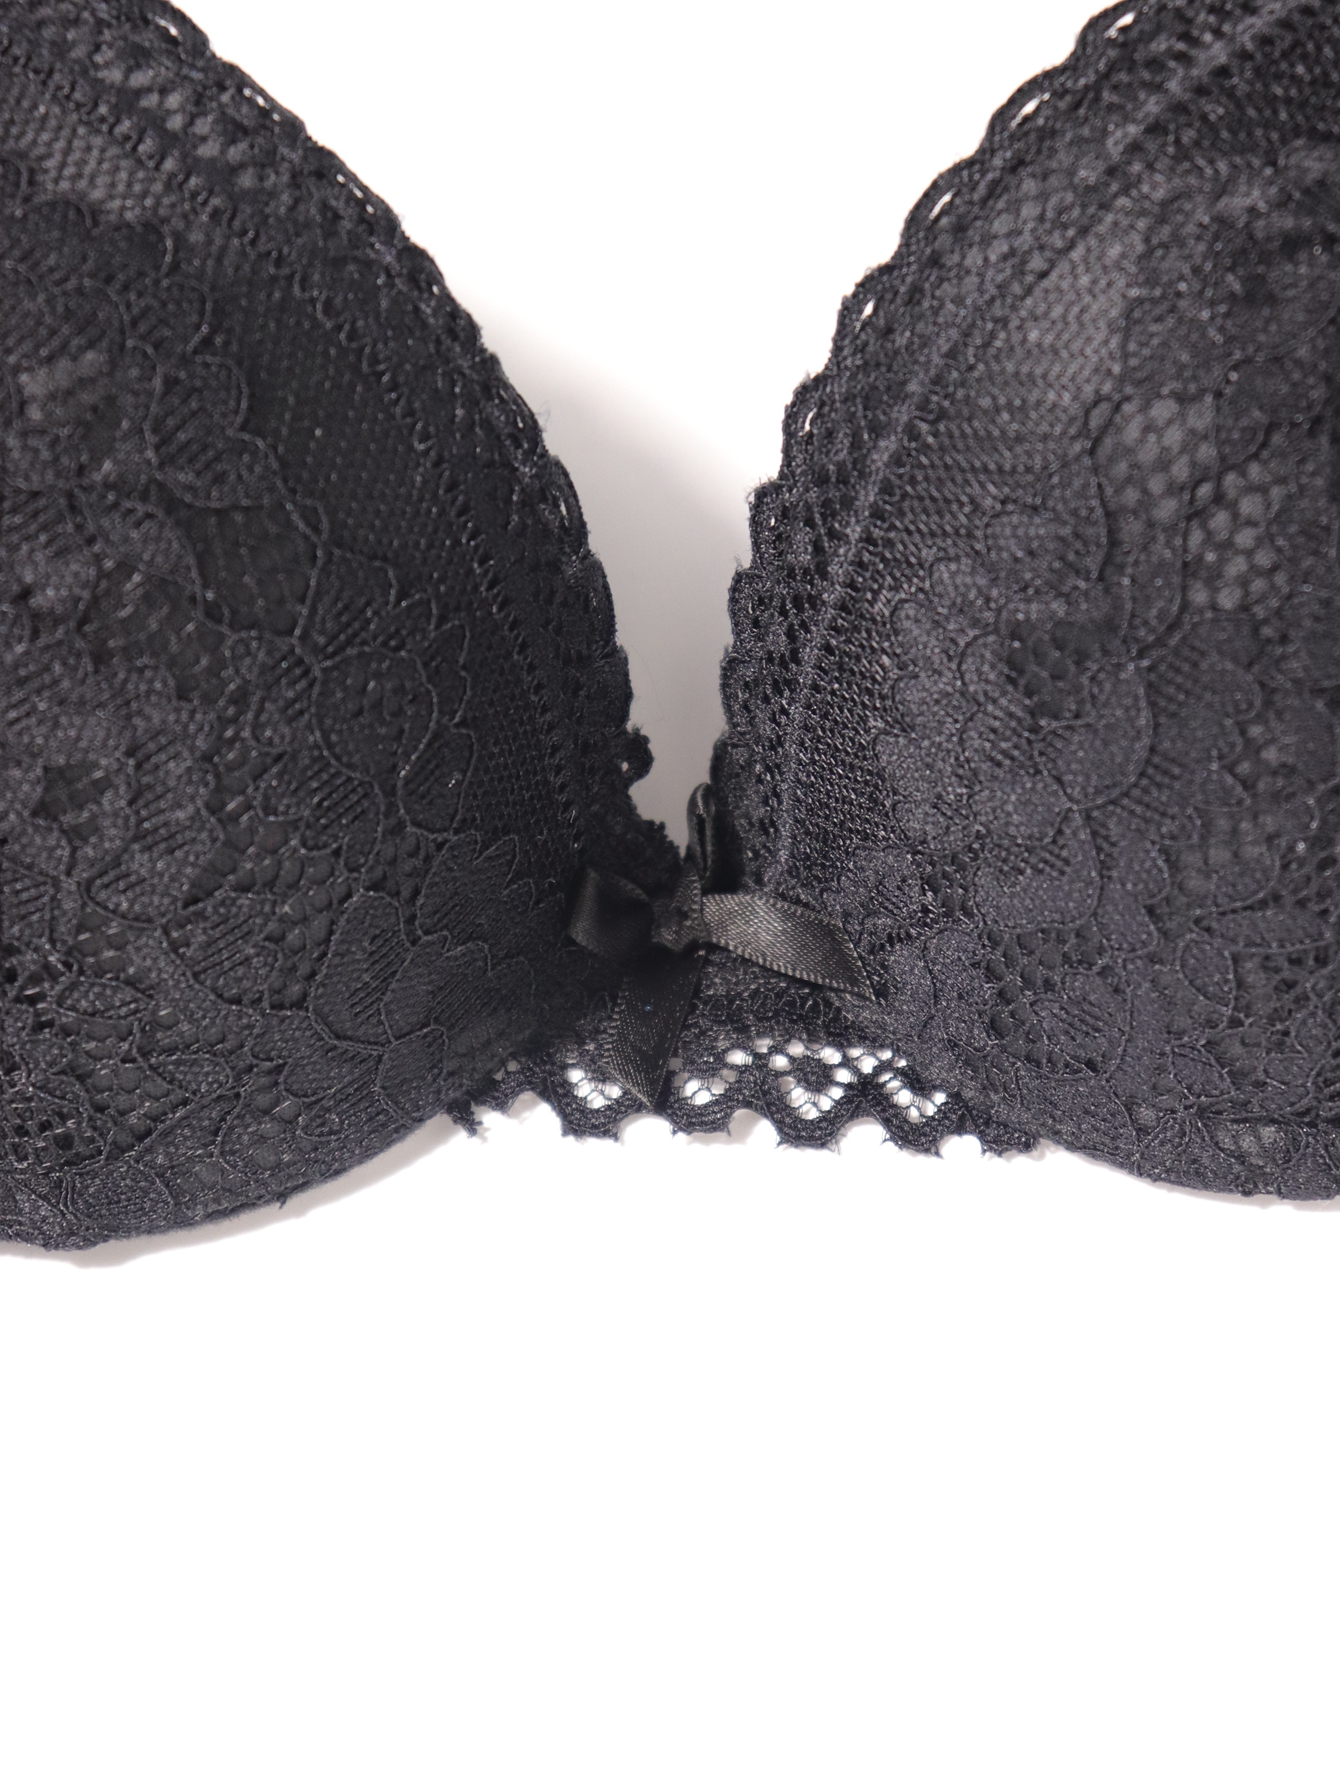 Front Closure Bra With Floral Lace Lift Stretch 5d Shaping Seamless Bra  Push Up Full Coverage 